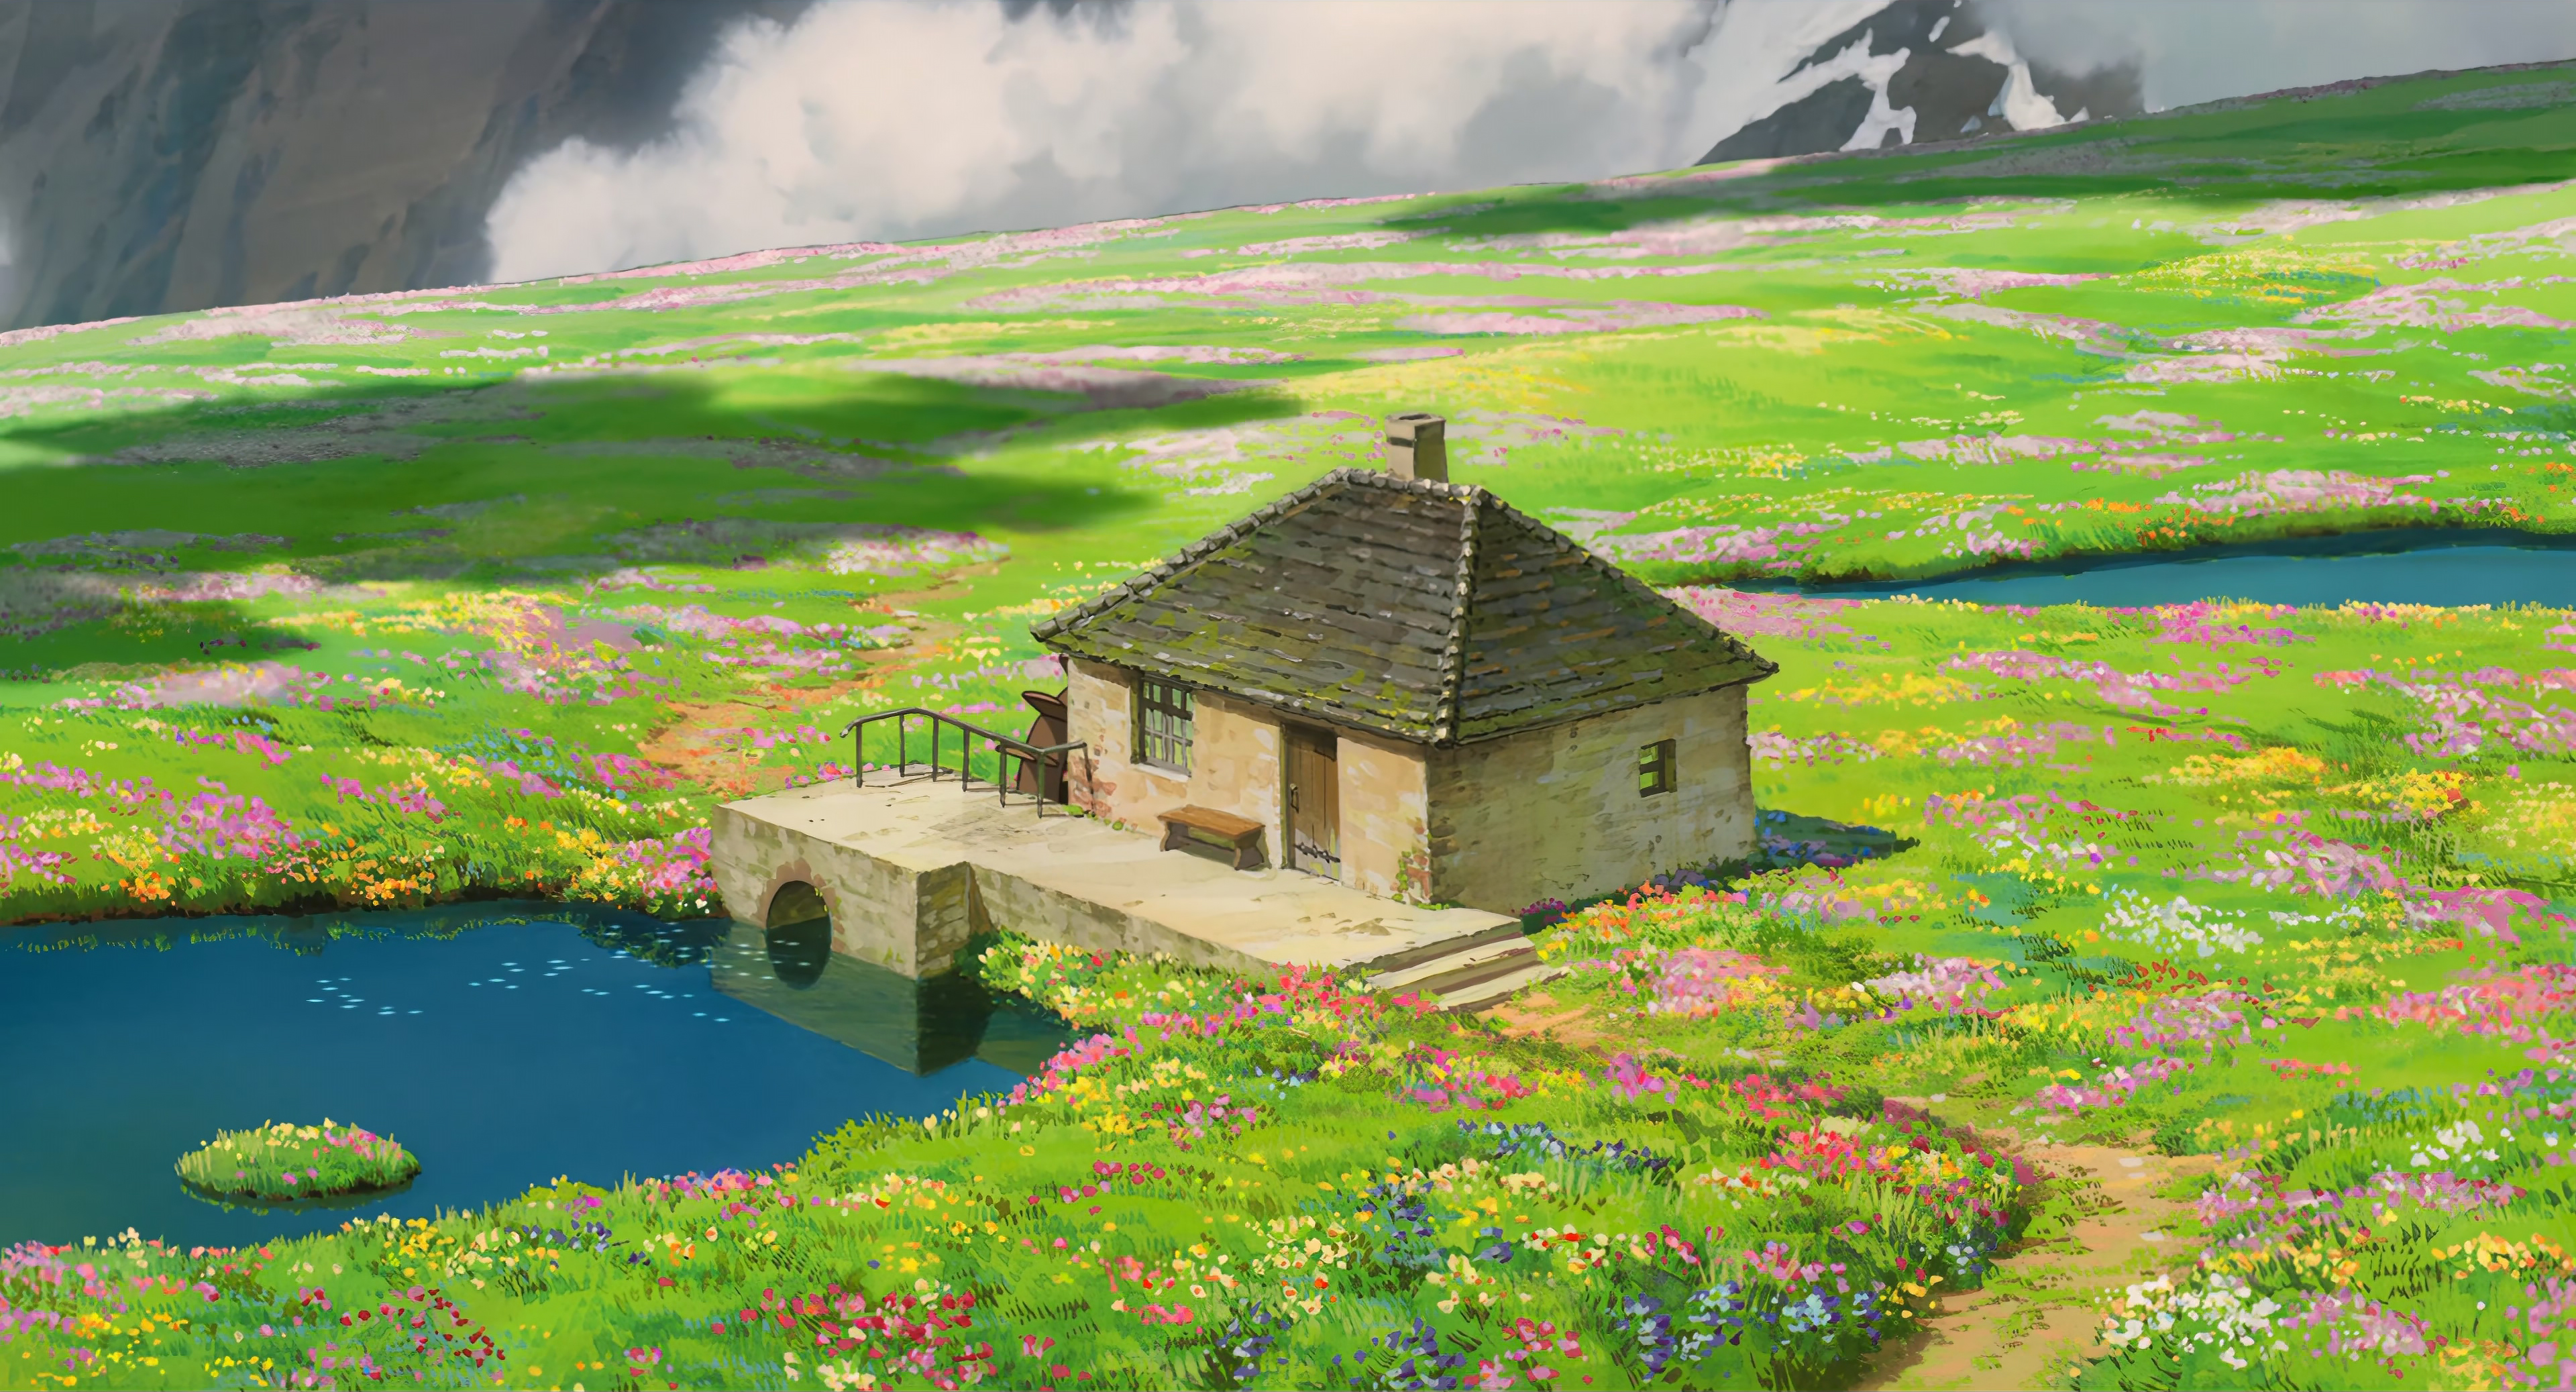 Anime 3840x2075 Howl's Moving Castle Studio Ghibli anime field house water reflection clouds plants